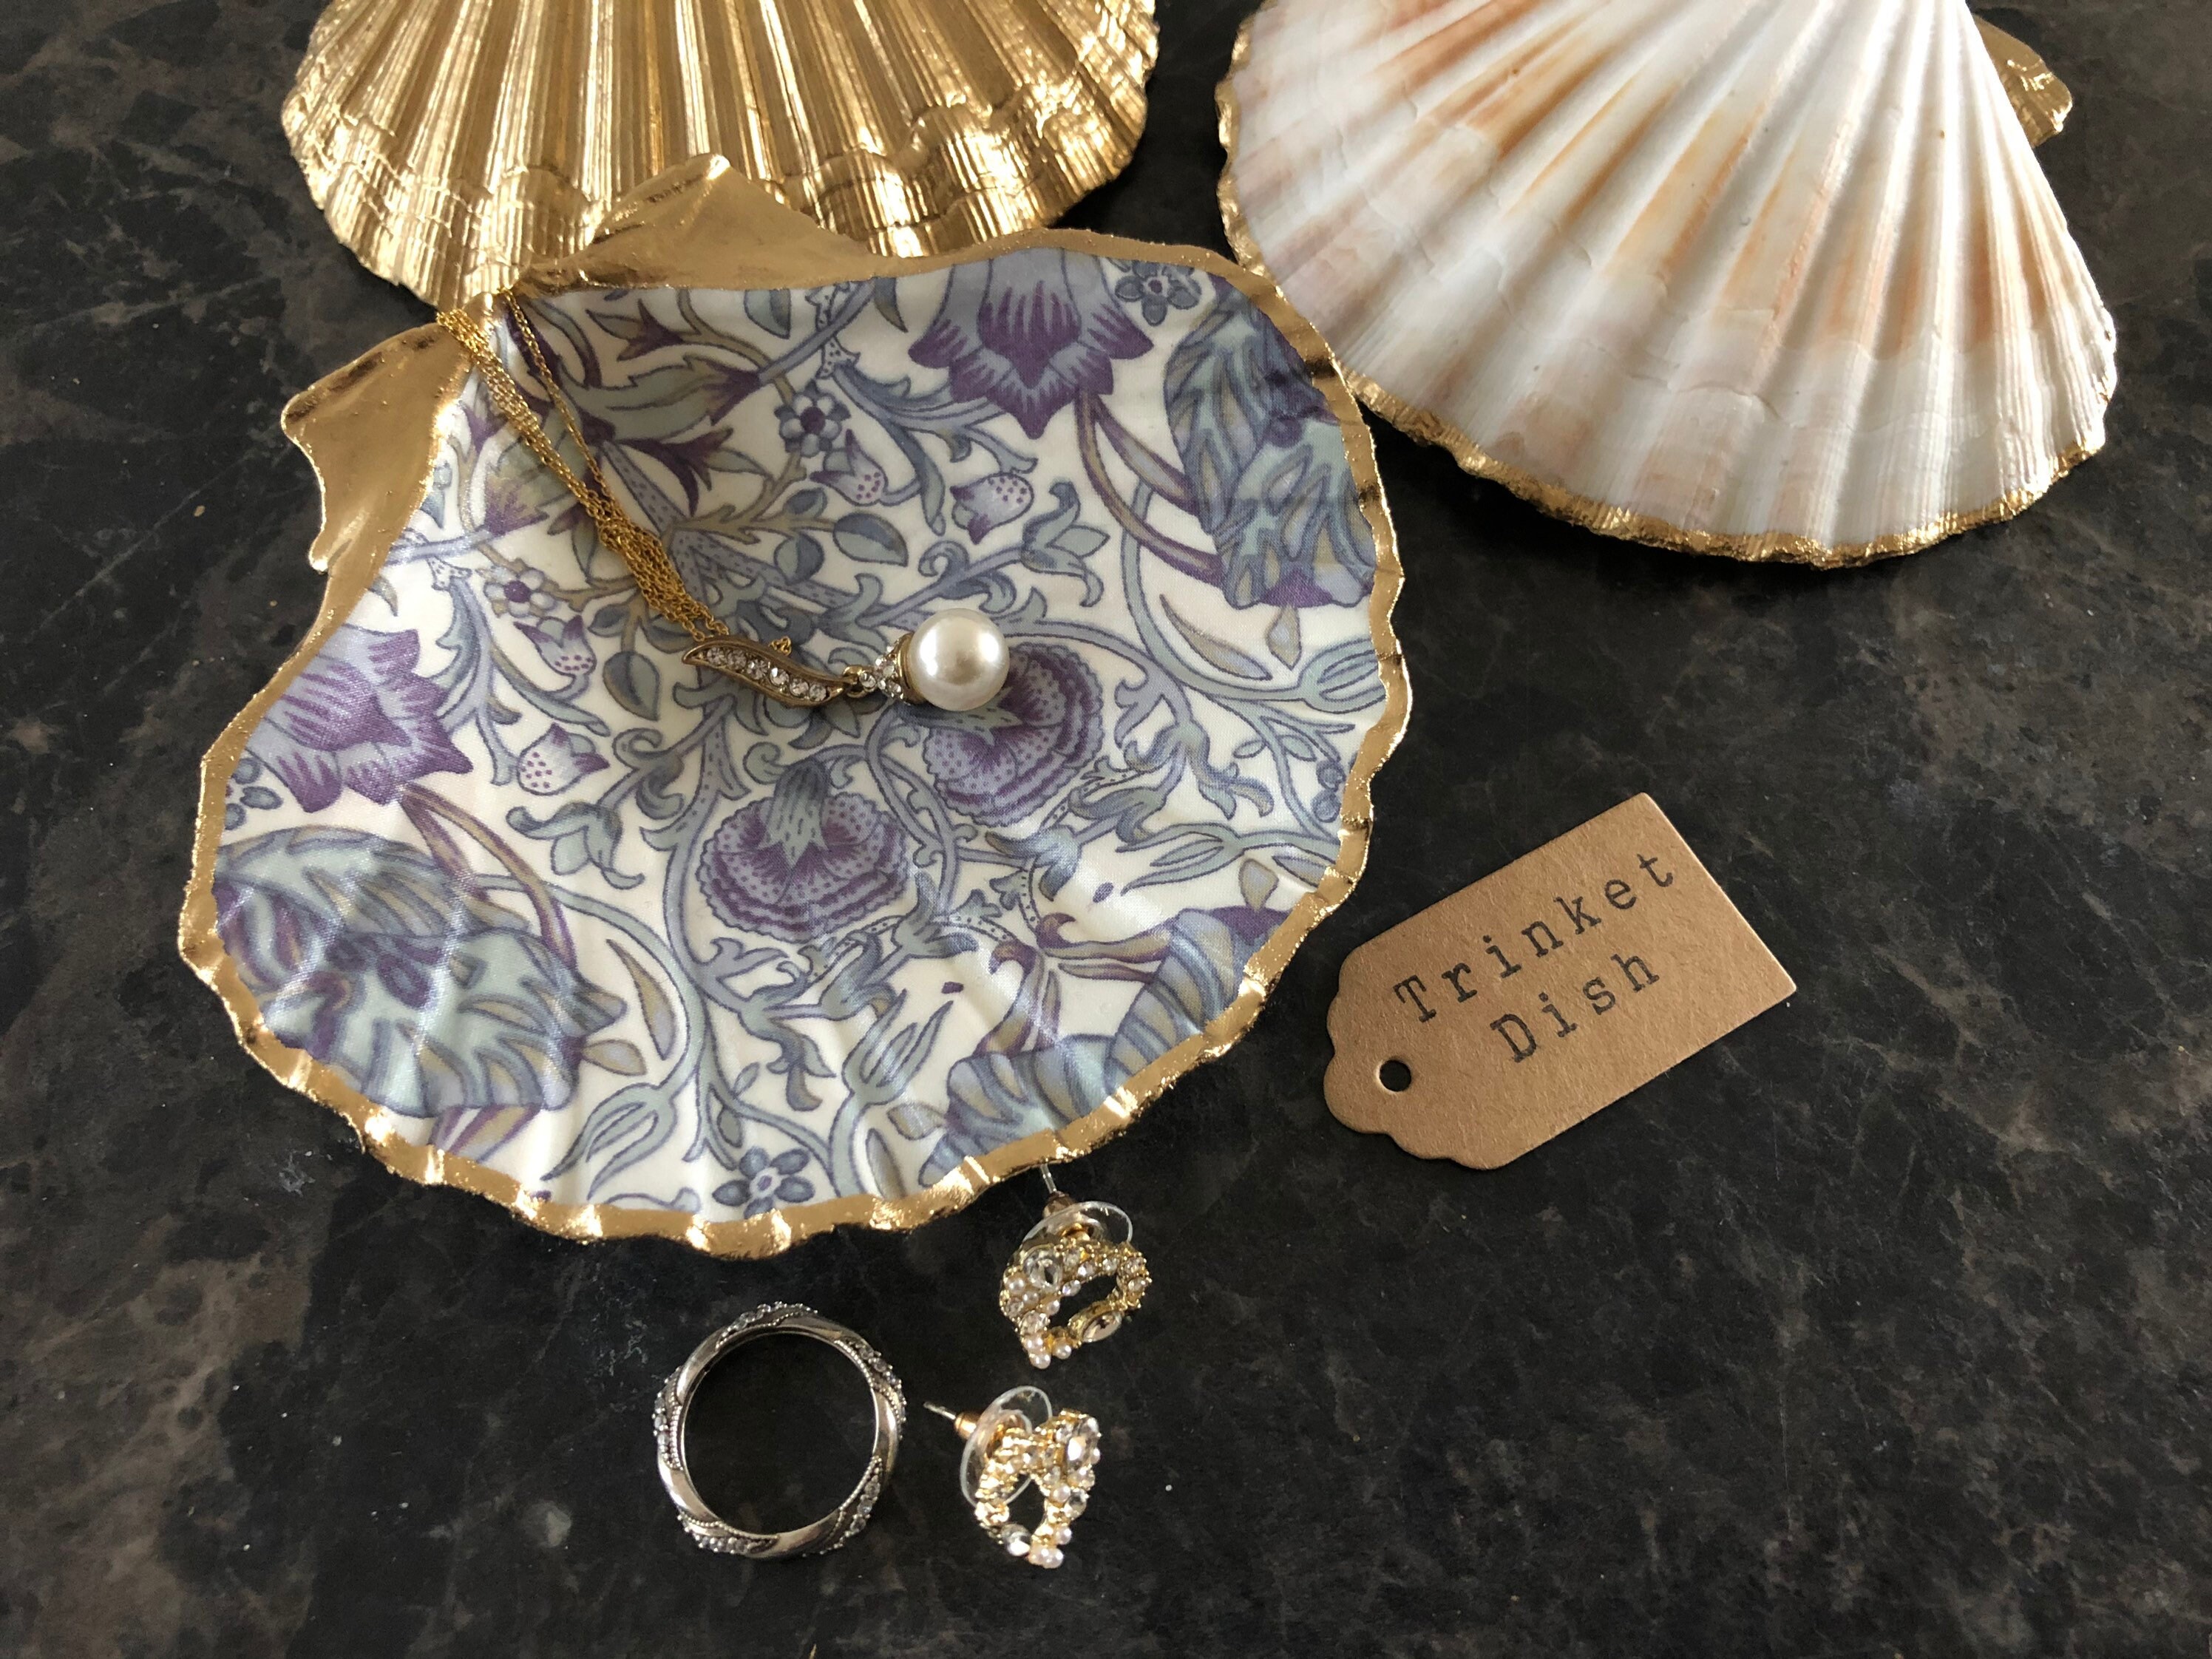 William Morris Gold Scallop Shell Trinket Dish in Lodden | Etsy